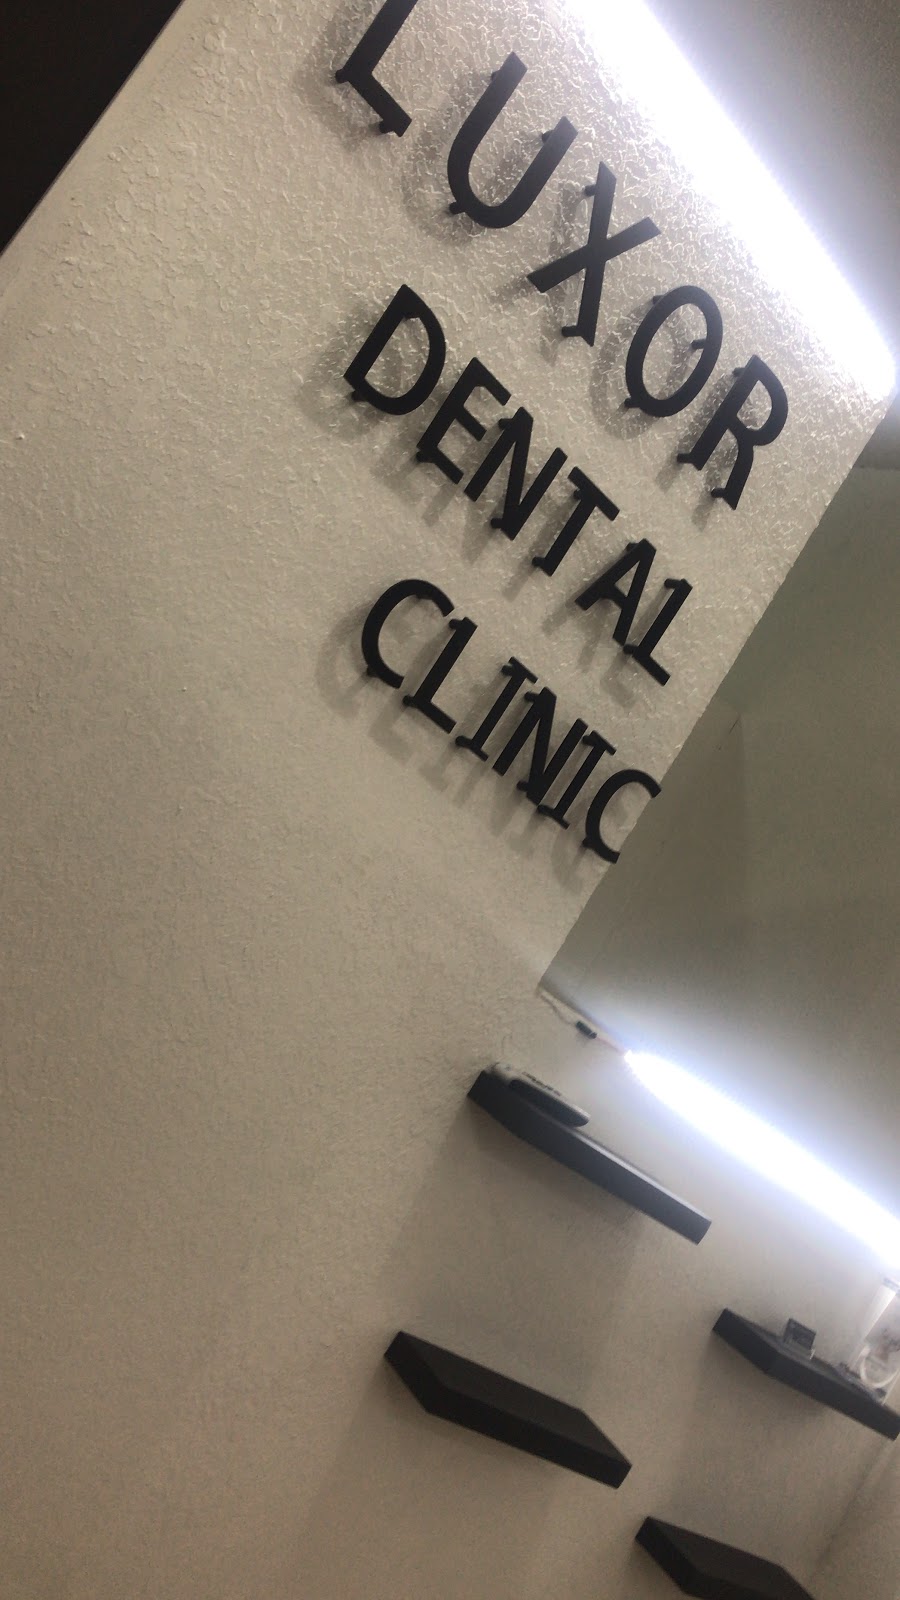 Luxor Dental Clinic | Ave. Waterfill Río Bravo Plaza Vencedores L-15 32553, Waterfill Río Bravo, 32553 Cd Juárez, Chih., Mexico | Phone: 656 356 0392